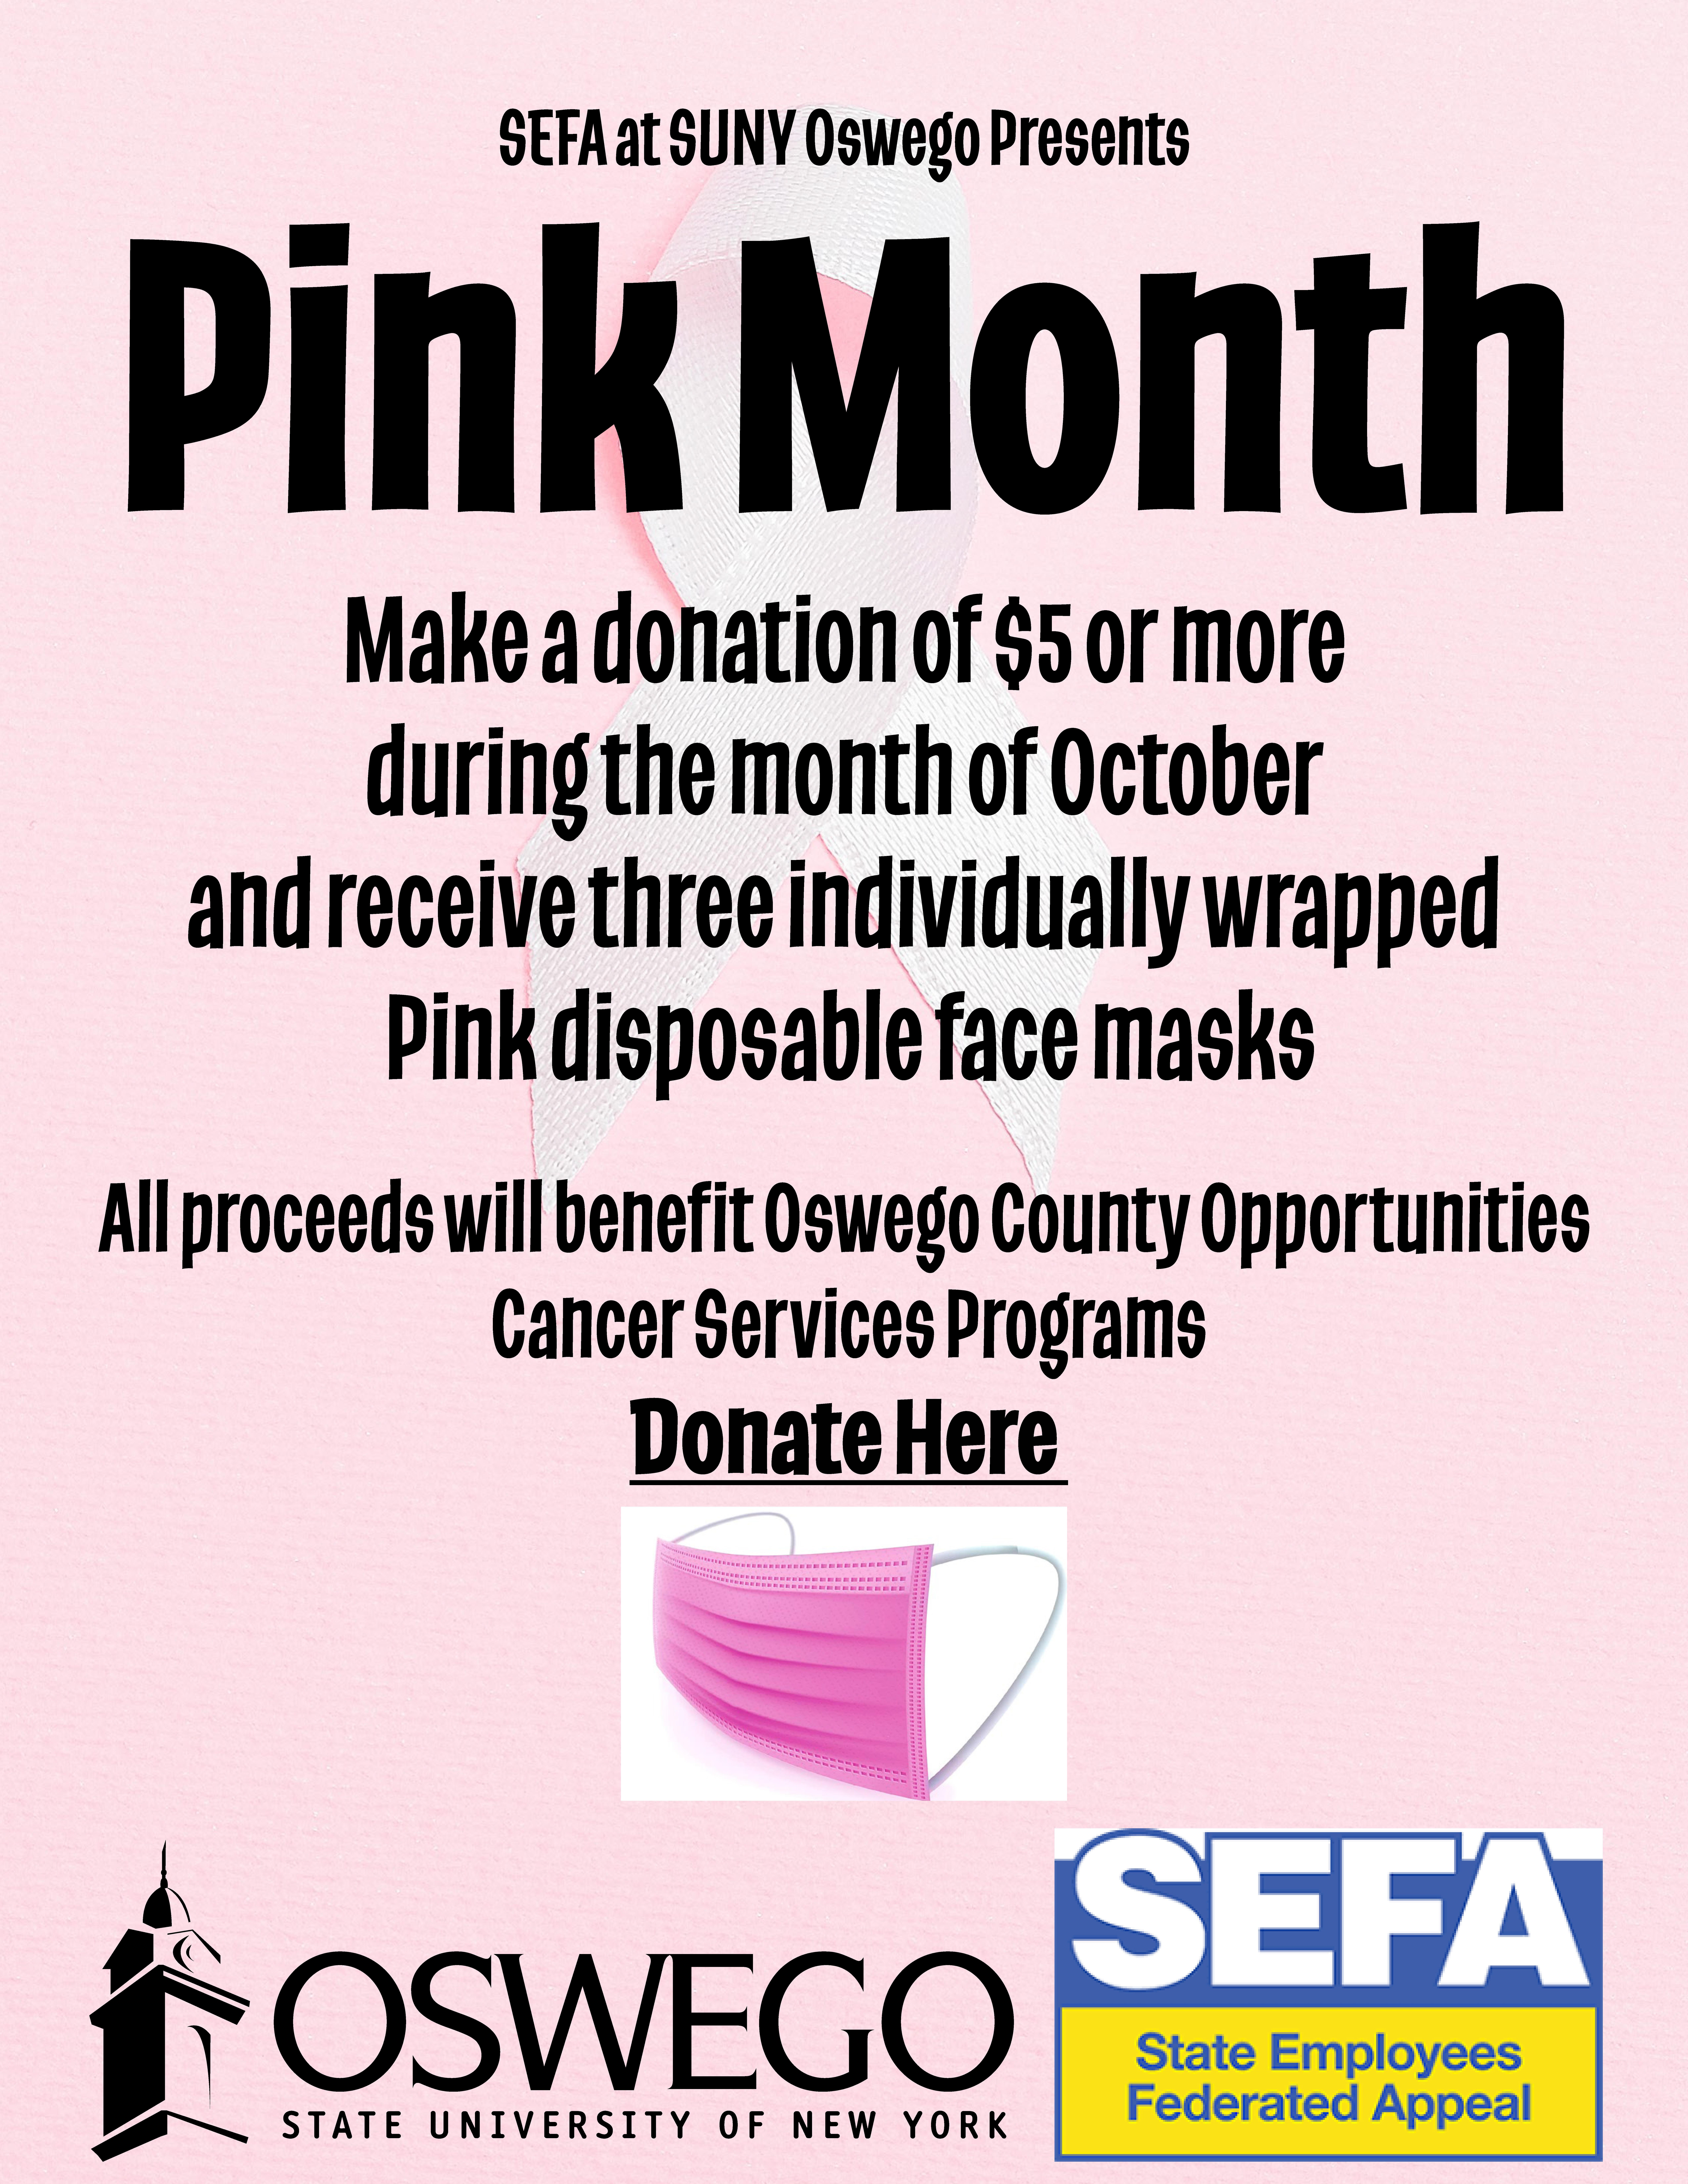 Details about the Pink Month donate at least $5 and get three PINK disposable face masks